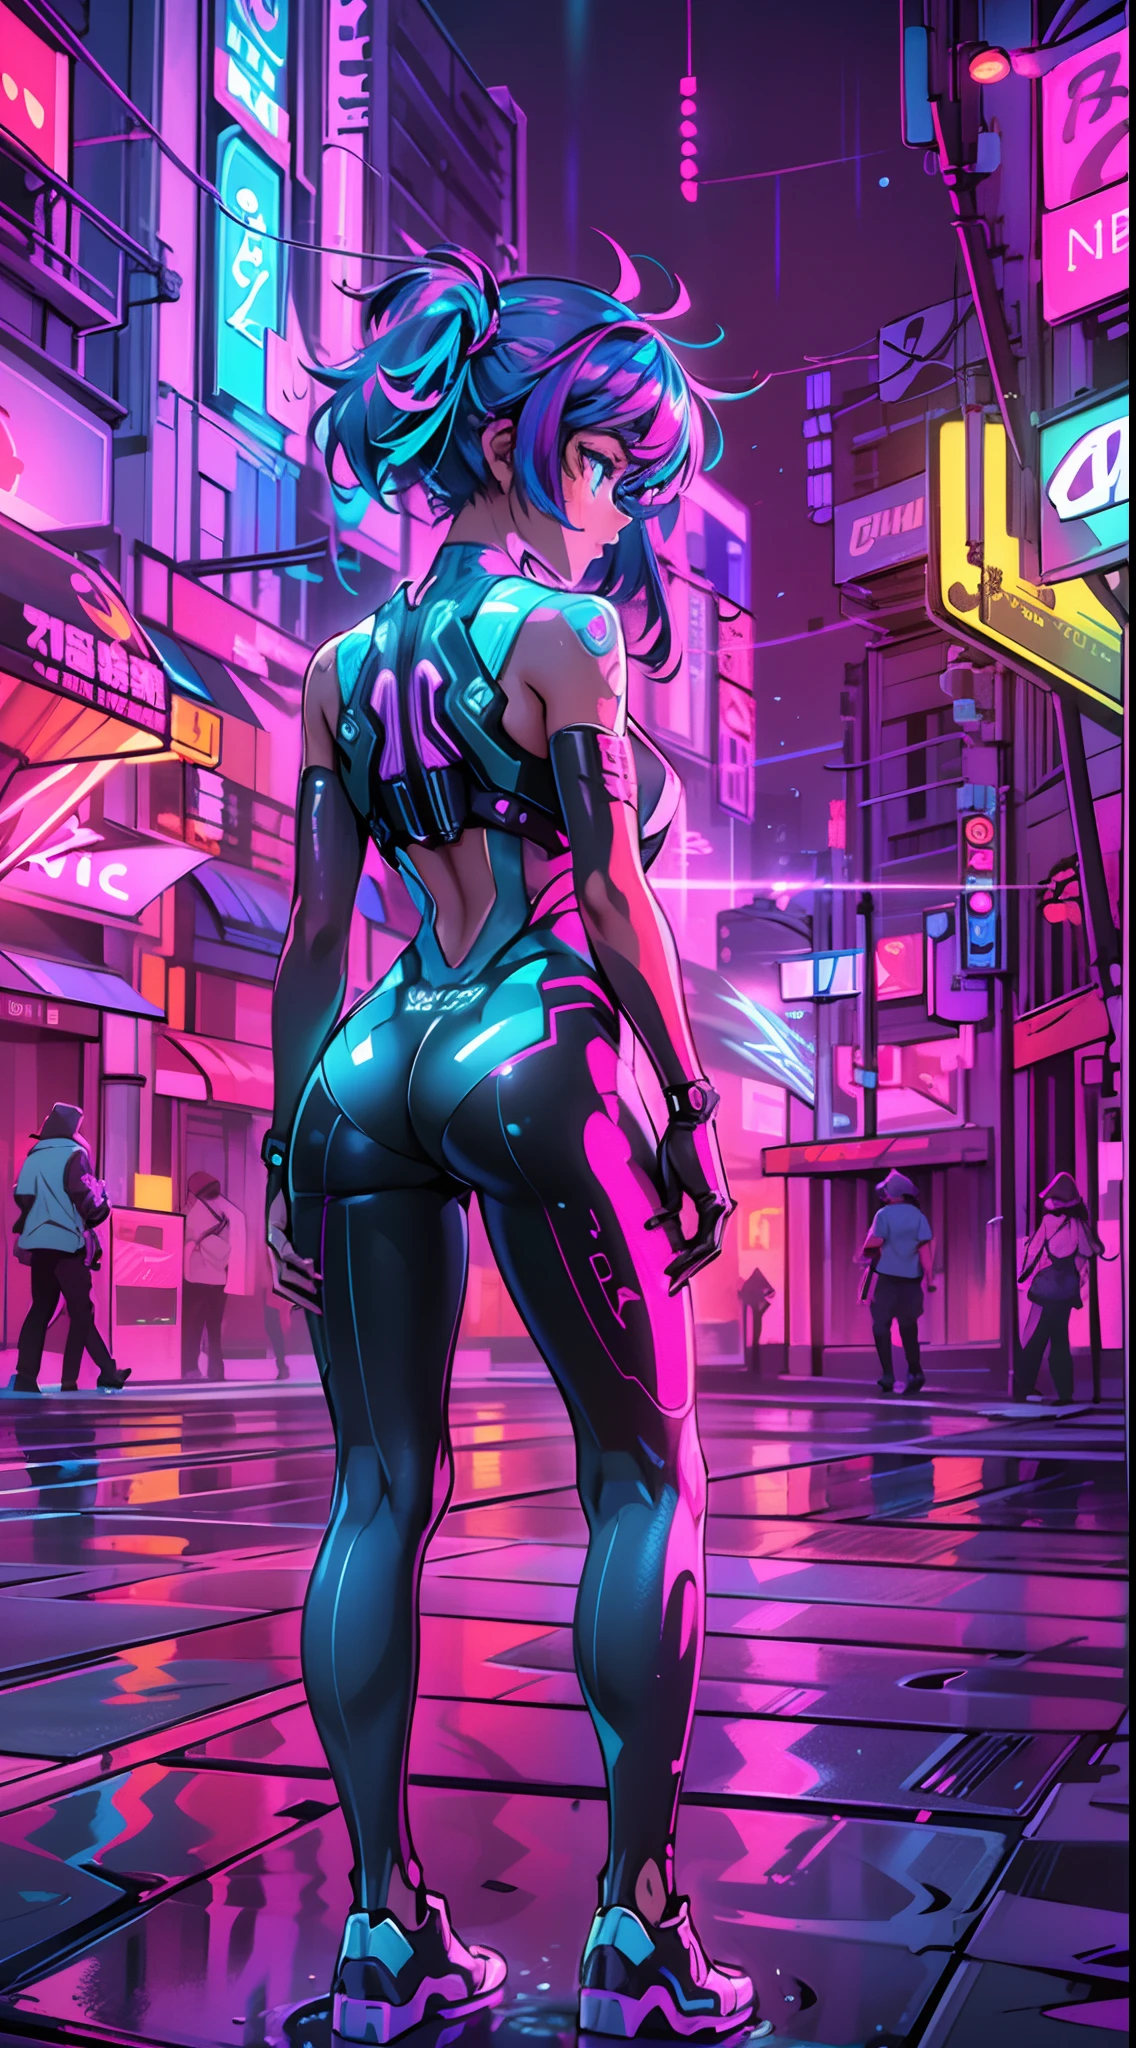 (best quality,4k,8k,highres,masterpiece:1.2),ultra-detailed,(realistic,photorealistic,photo-realistic:1.37),cyberpunk girl,Neon Kaleidoscopixie,girl with vibrant neon hair,vibrant glowing eyes,glowing neon tattoos on her body,high-tech cybernetic implants,shimmering holographic clothing,gritty urban cityscape background,bright neon lights and signs reflecting on wet pavement,pixelated digital rain falling,giant holographic animal companions following her,futuristic hoverboard under her feet,deep shadows and contrasting colors,retro-futuristic aesthetics,fluorescent lights creating a surreal atmosphere,visually stunning and immersive,neon-lit underground club scene,sharp focus on her captivating expression,iridescent butterfly wings sprouting from her back,energetic cyberpunk music playing in the background,cityscape illuminated by neon skyscrapers,artificial intelligence assistant floating by her side,transparent umbrellas shielding her from the rain,LED light trails following her movement,electric blue and hot pink color palette,evoking a sense of mystery and excitement,blinking neon signs advertising futuristic gadgets,enhanced reality glasses enhancing her vision,holographic art installations evolving in the city,wireframe buildings and floating platforms,interplay of light and shadow creating dramatic effects,mix of organic and mechanical elements depicting the blend of humanity and technology,embracing the spirit of rebellion and individuality,depicting a futuristic world filled with energy and technology advancements.